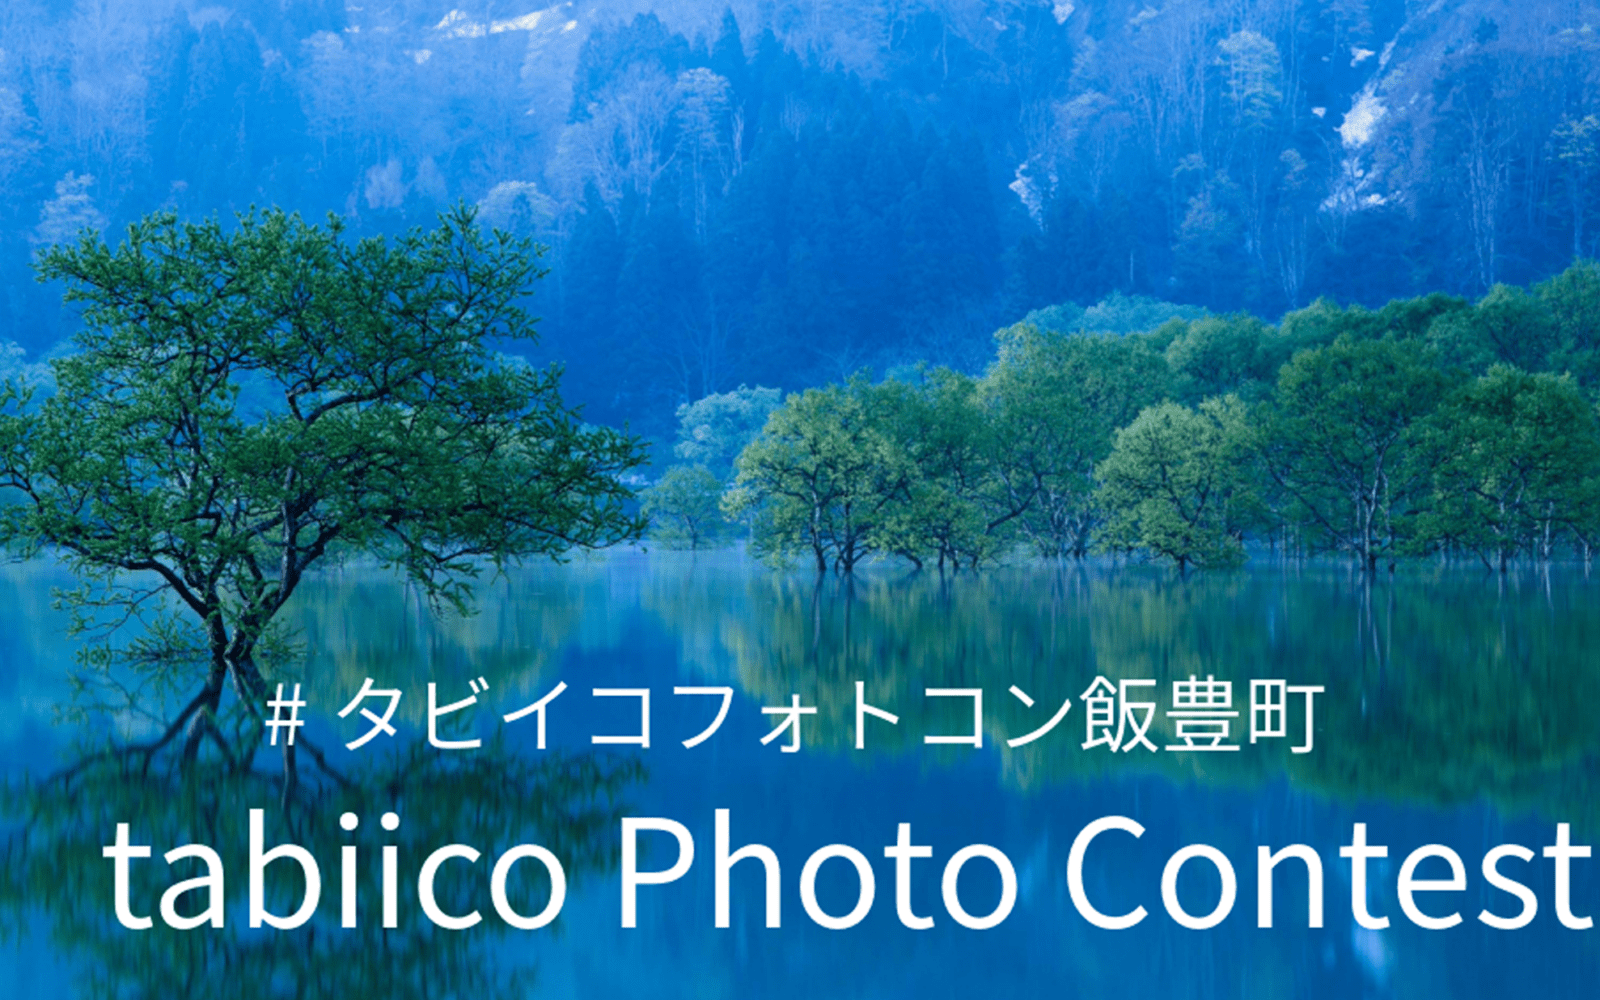 Regional Development Initiative: “Tabiico Photo Contest 2024 Spring” in Collaboration with Iide Town, Yamagata Prefecture